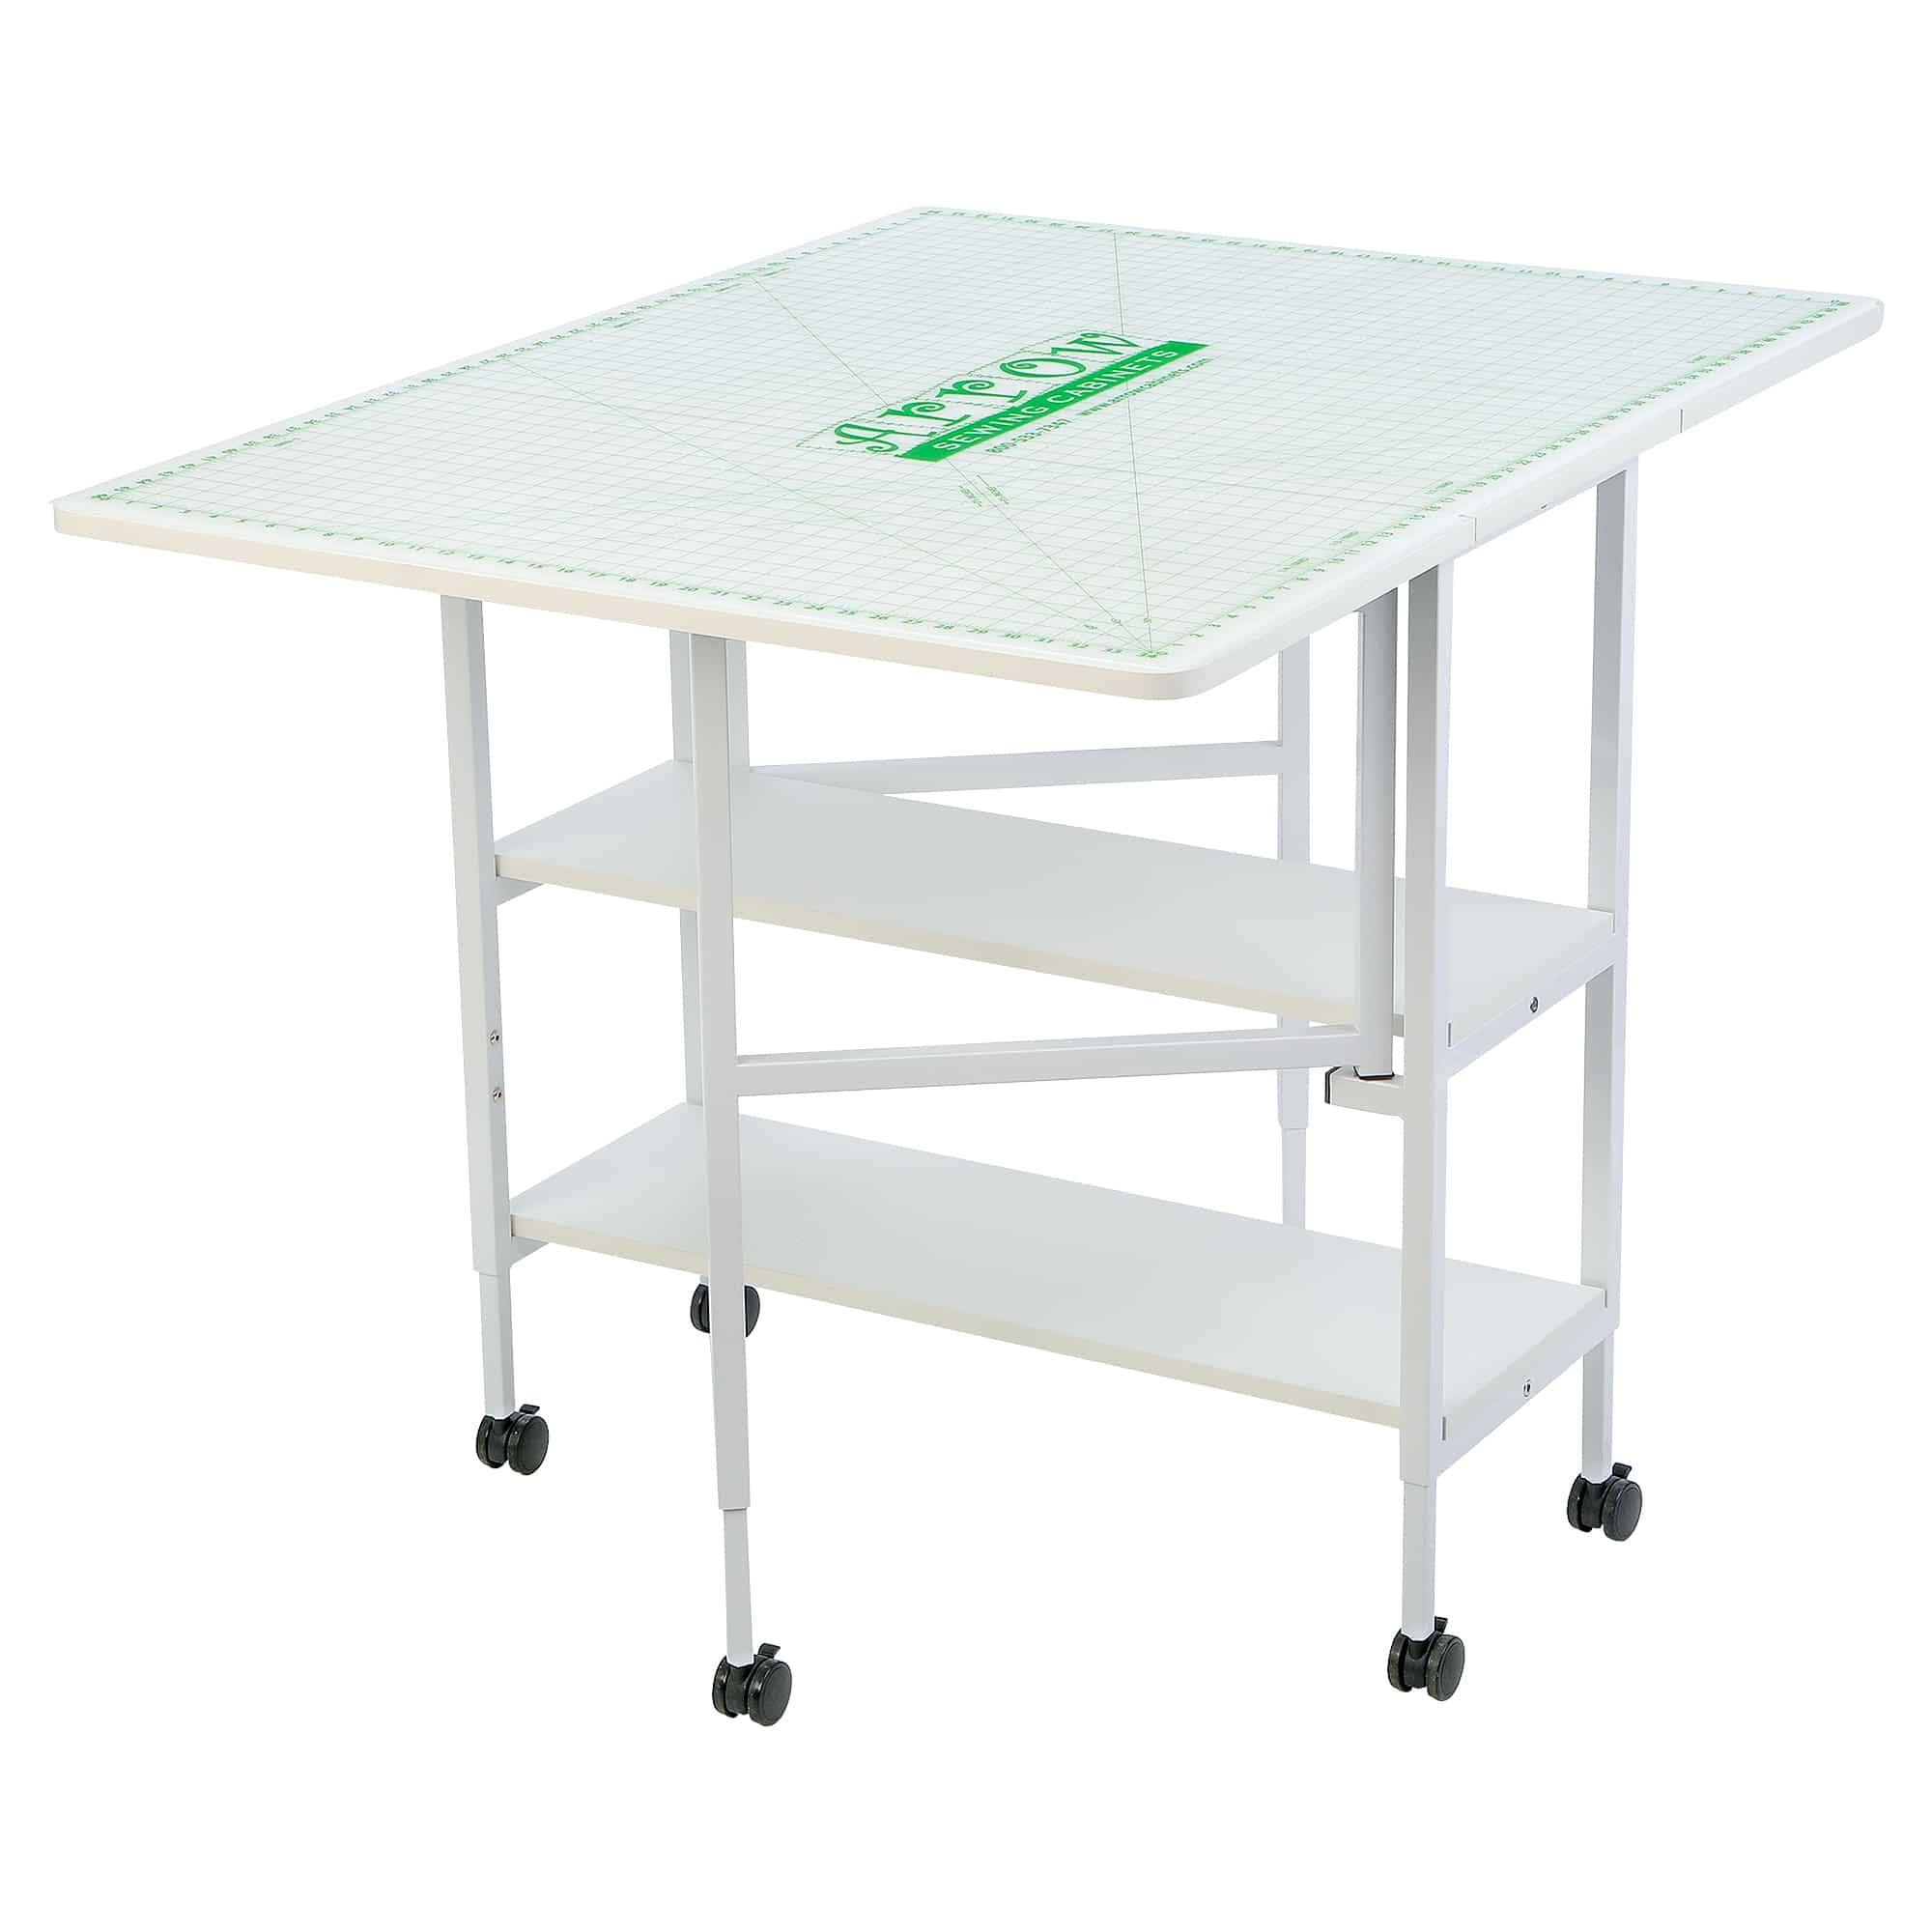 White Dixie Cutting Table (3401) from Arrow Sewing Furniture opened with MAT-C Cutting Mat